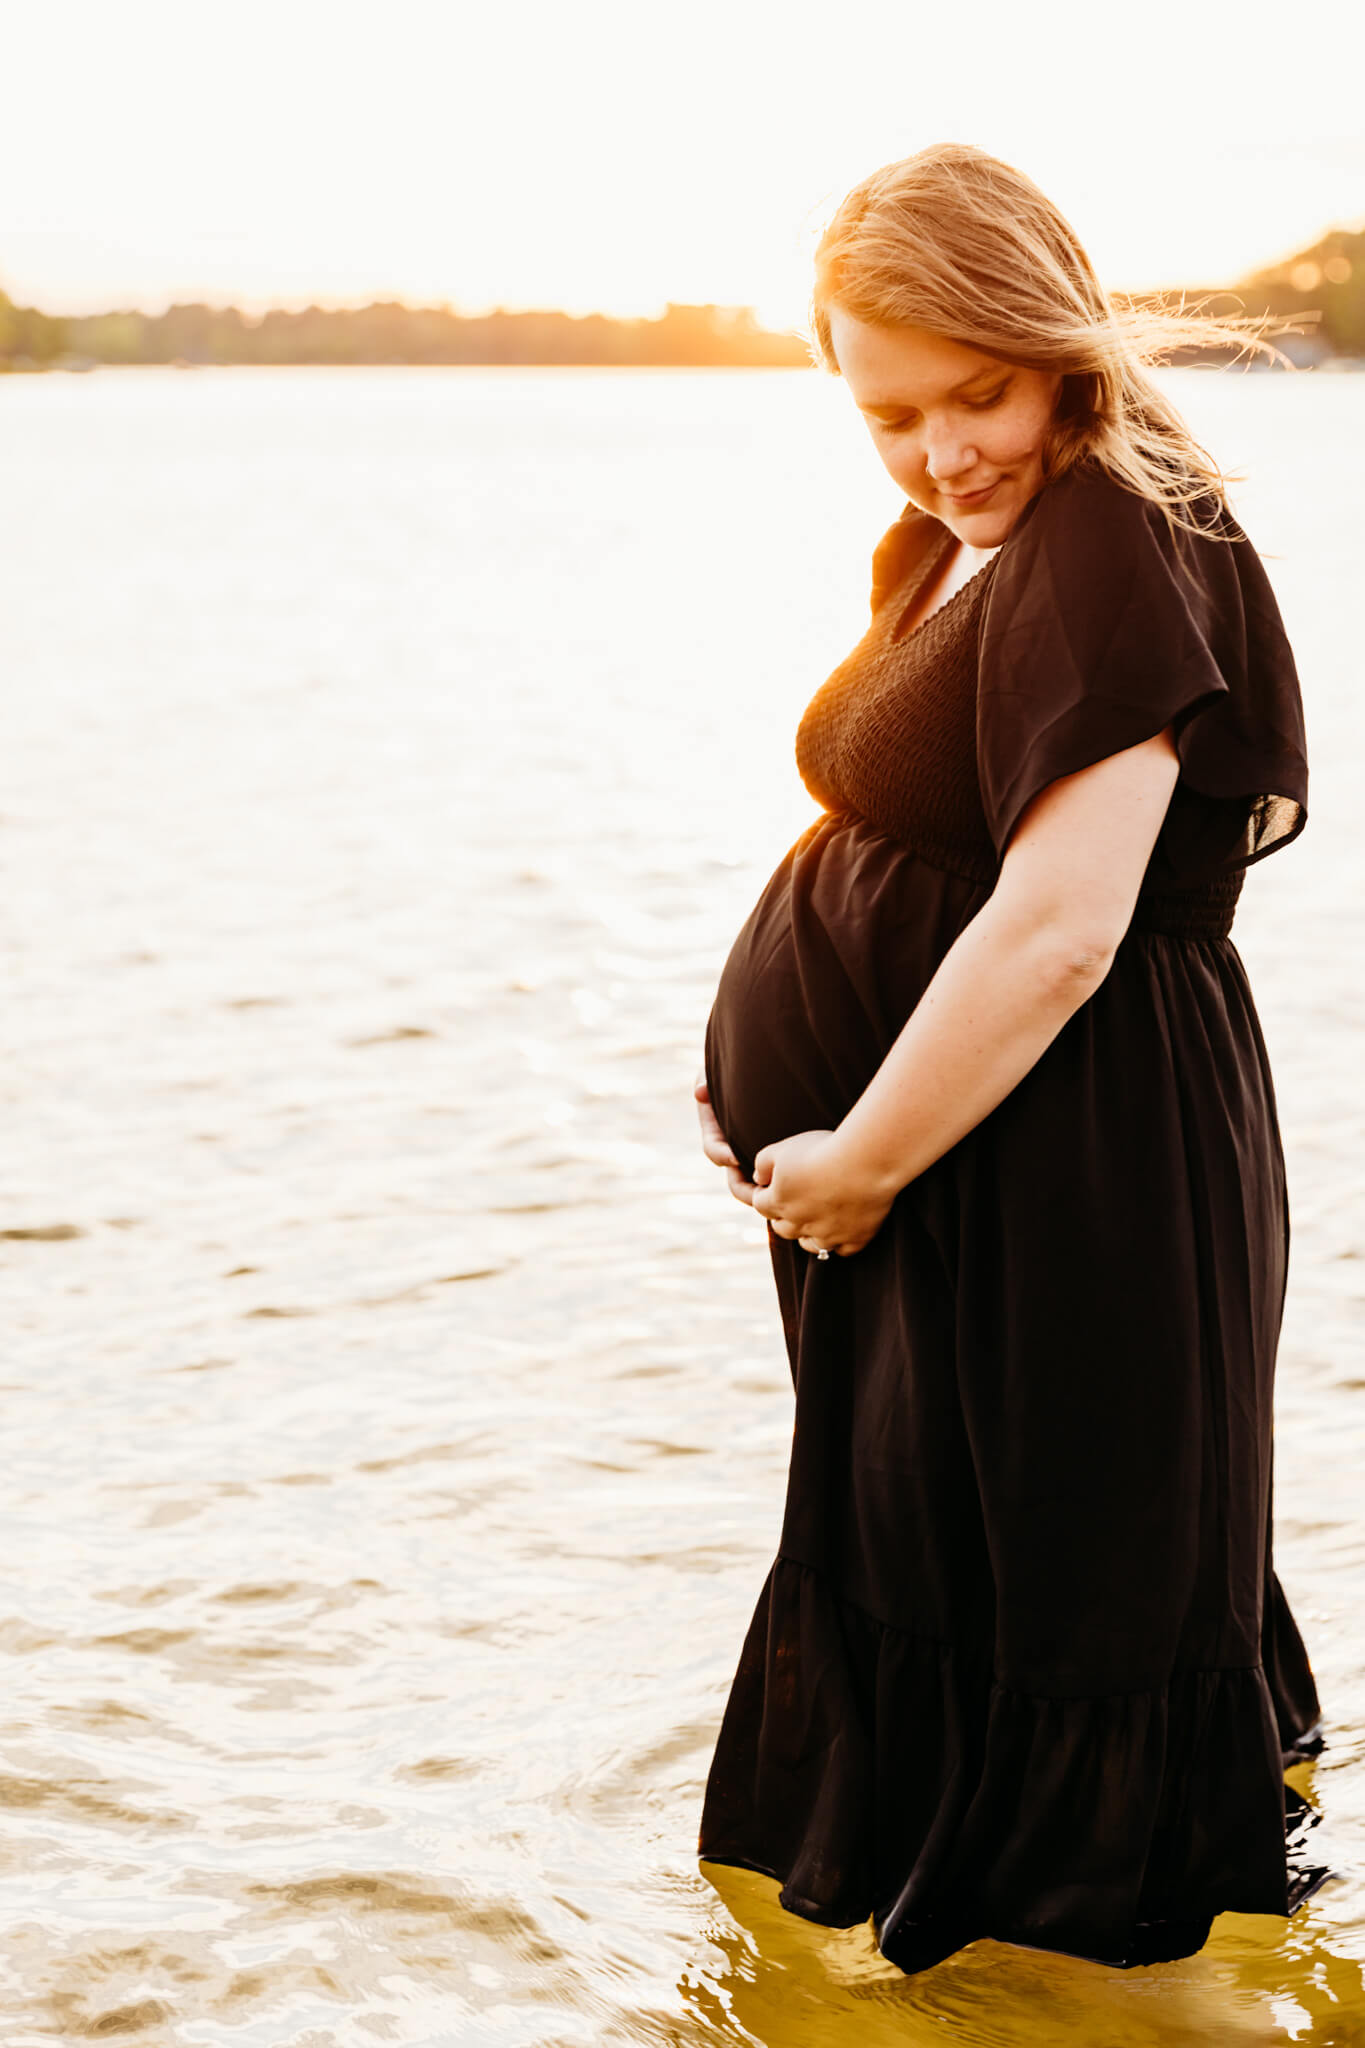 beautiful pregnant woman with red hair standing in a lake in a black dress and holding her baby bump as she looks down at her arm